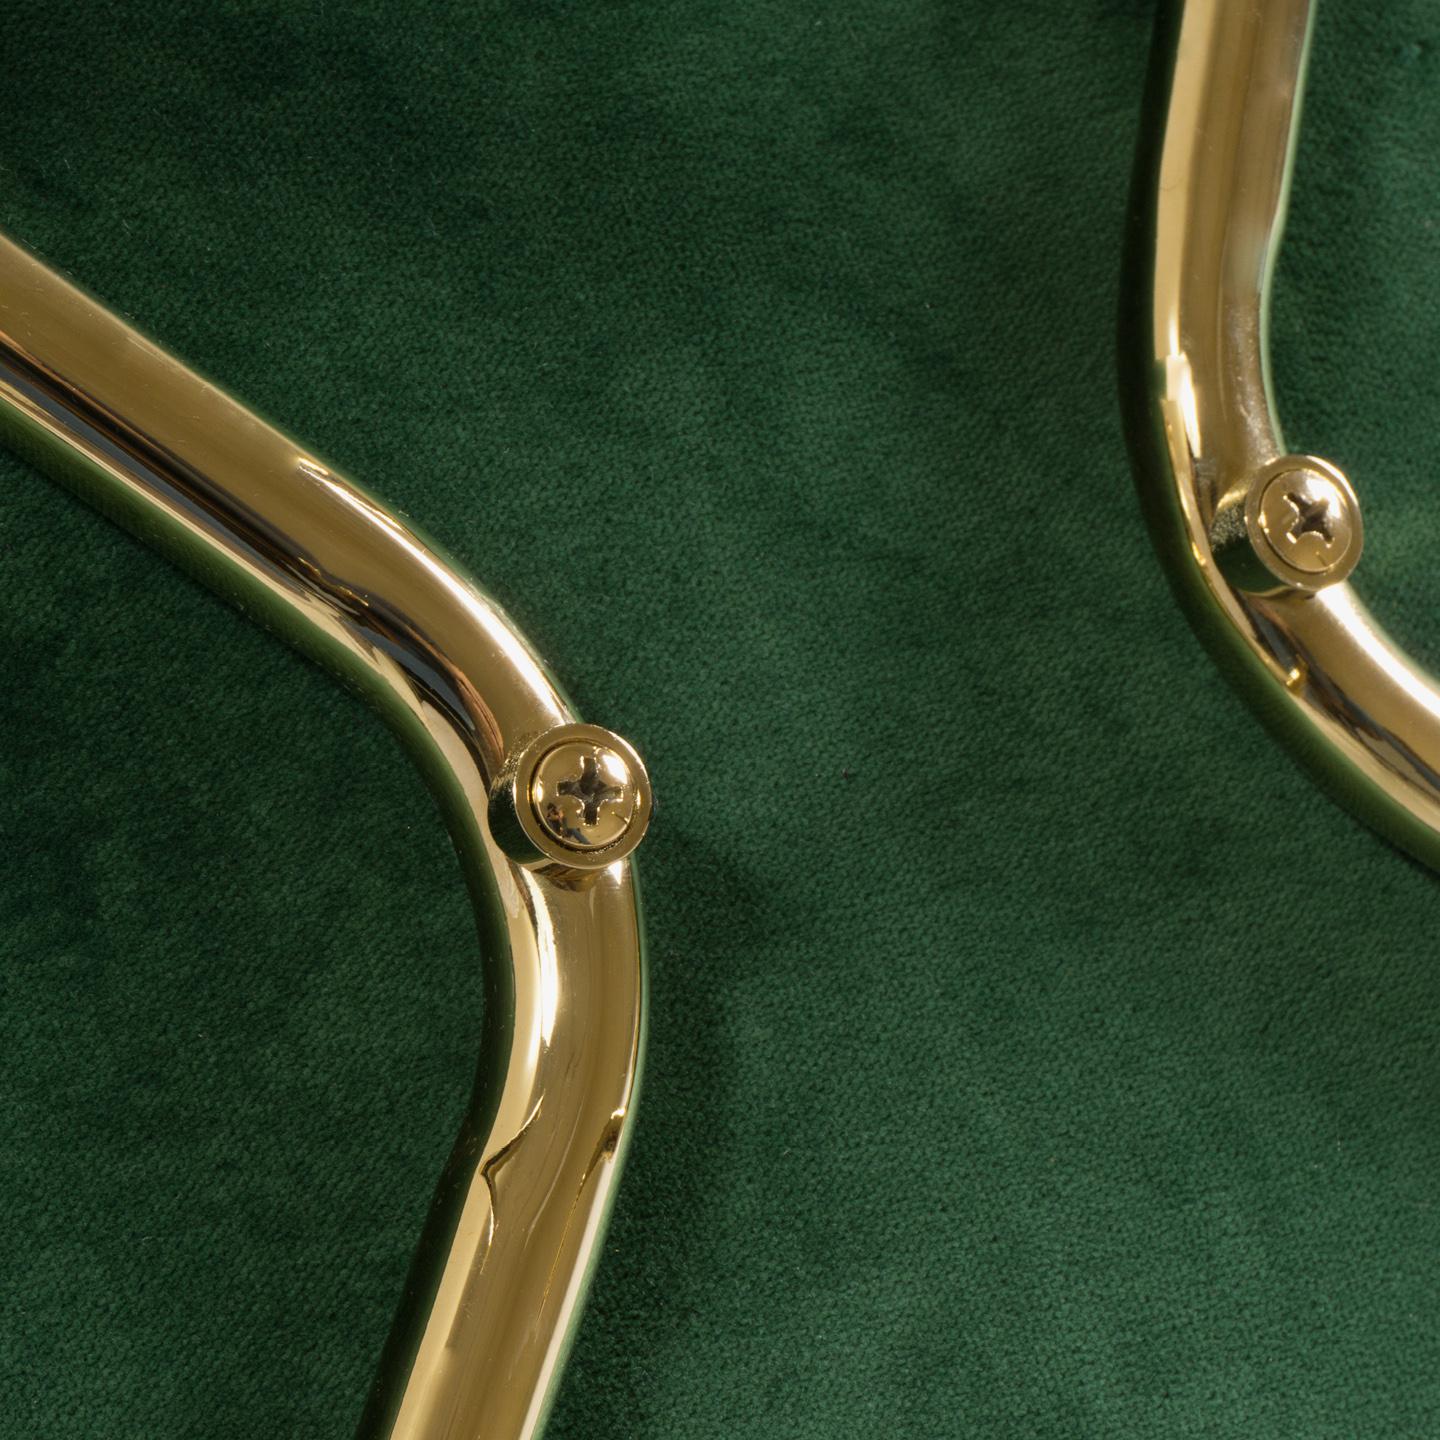 Saarinen Executive Armless Chair in Emerald Velvet, Gold Edition In Excellent Condition For Sale In Wilton, CT